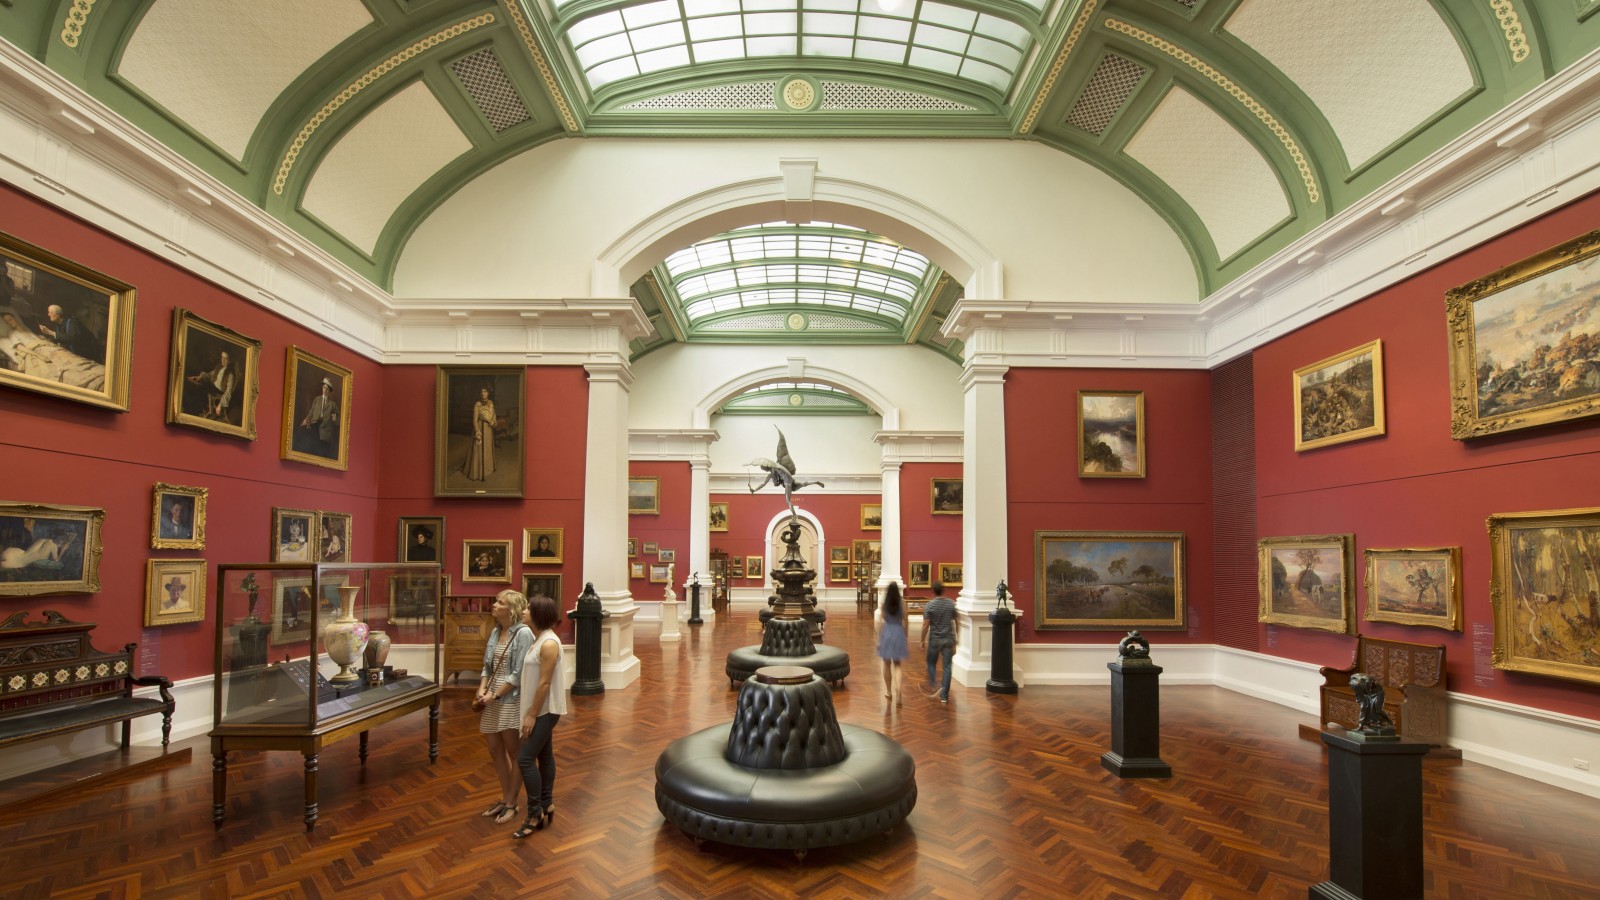 Adelaide's Famous Tourist Attractions - Art Gallery of South Australia